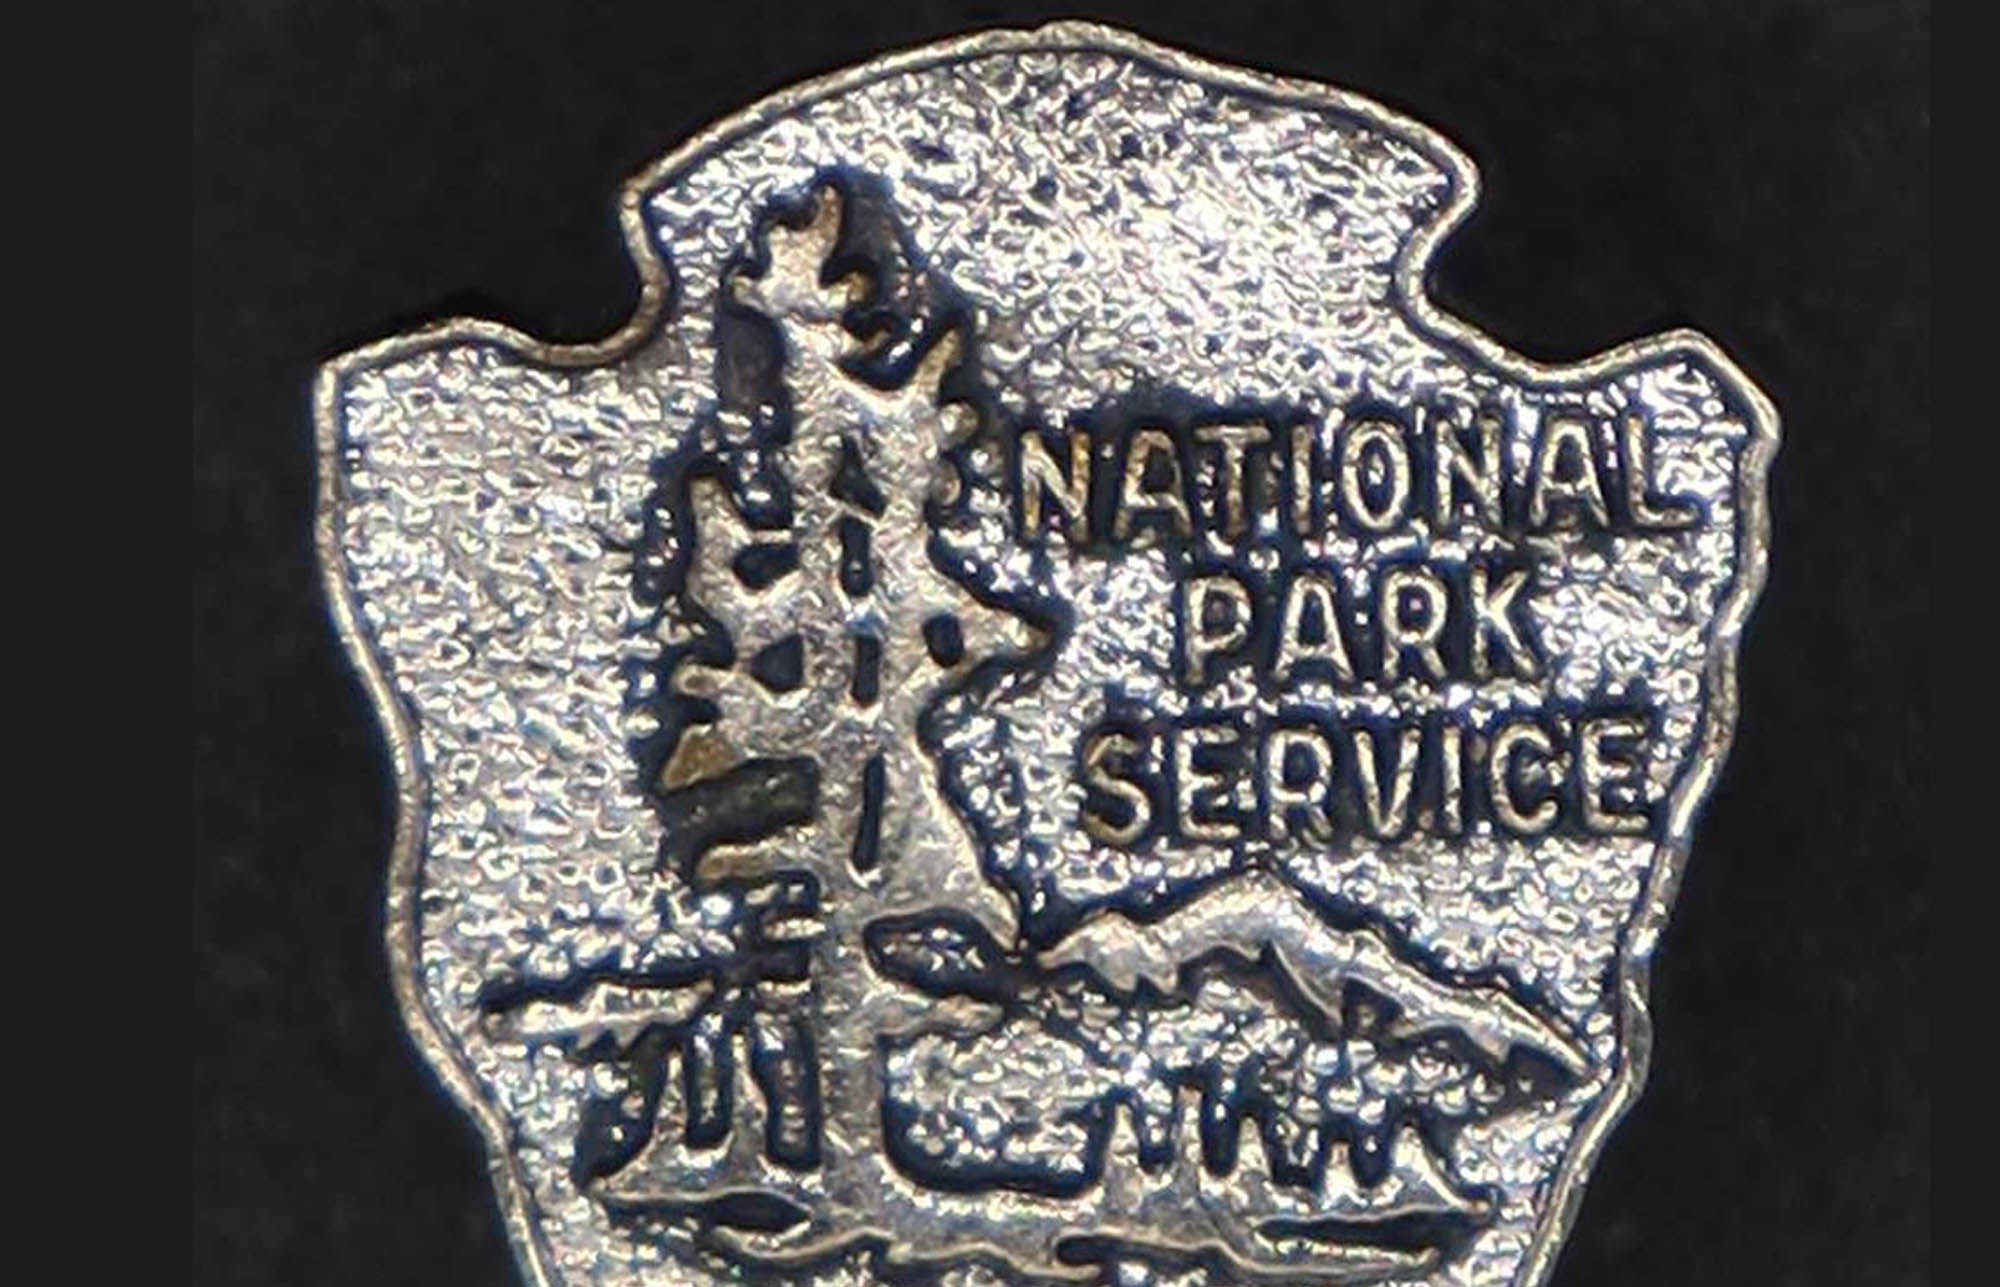 Silver arrowhead shaped pin with trees, mountains, bison, and words National Park Service.